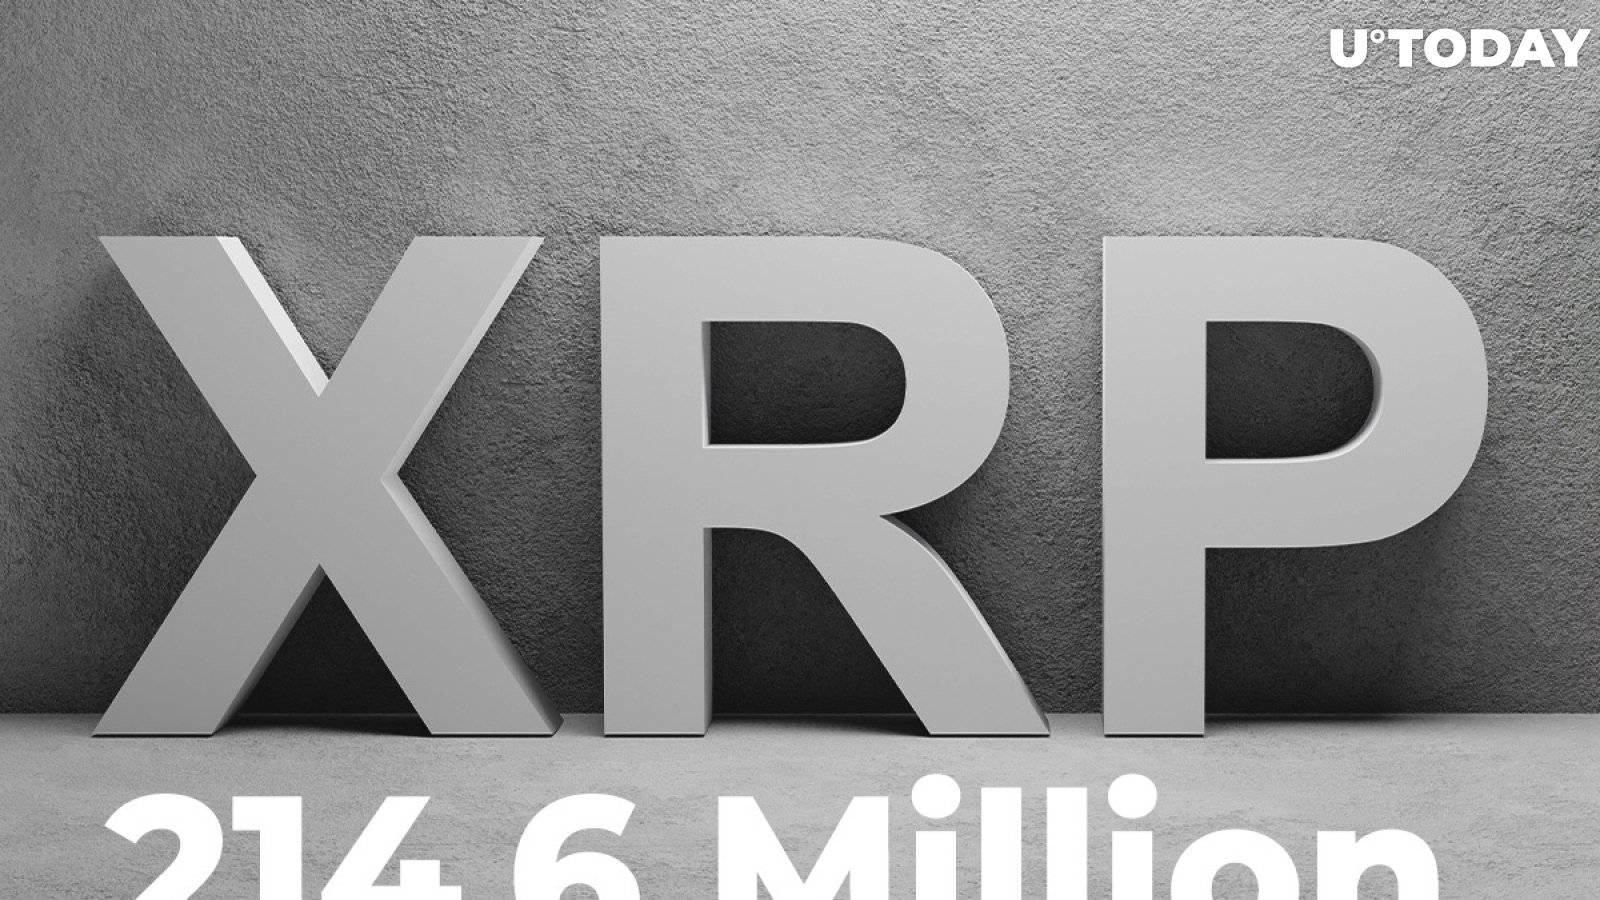 Jed McCaleb Sells 214.6 Million In Last Three Weeks: Report by XRPScan